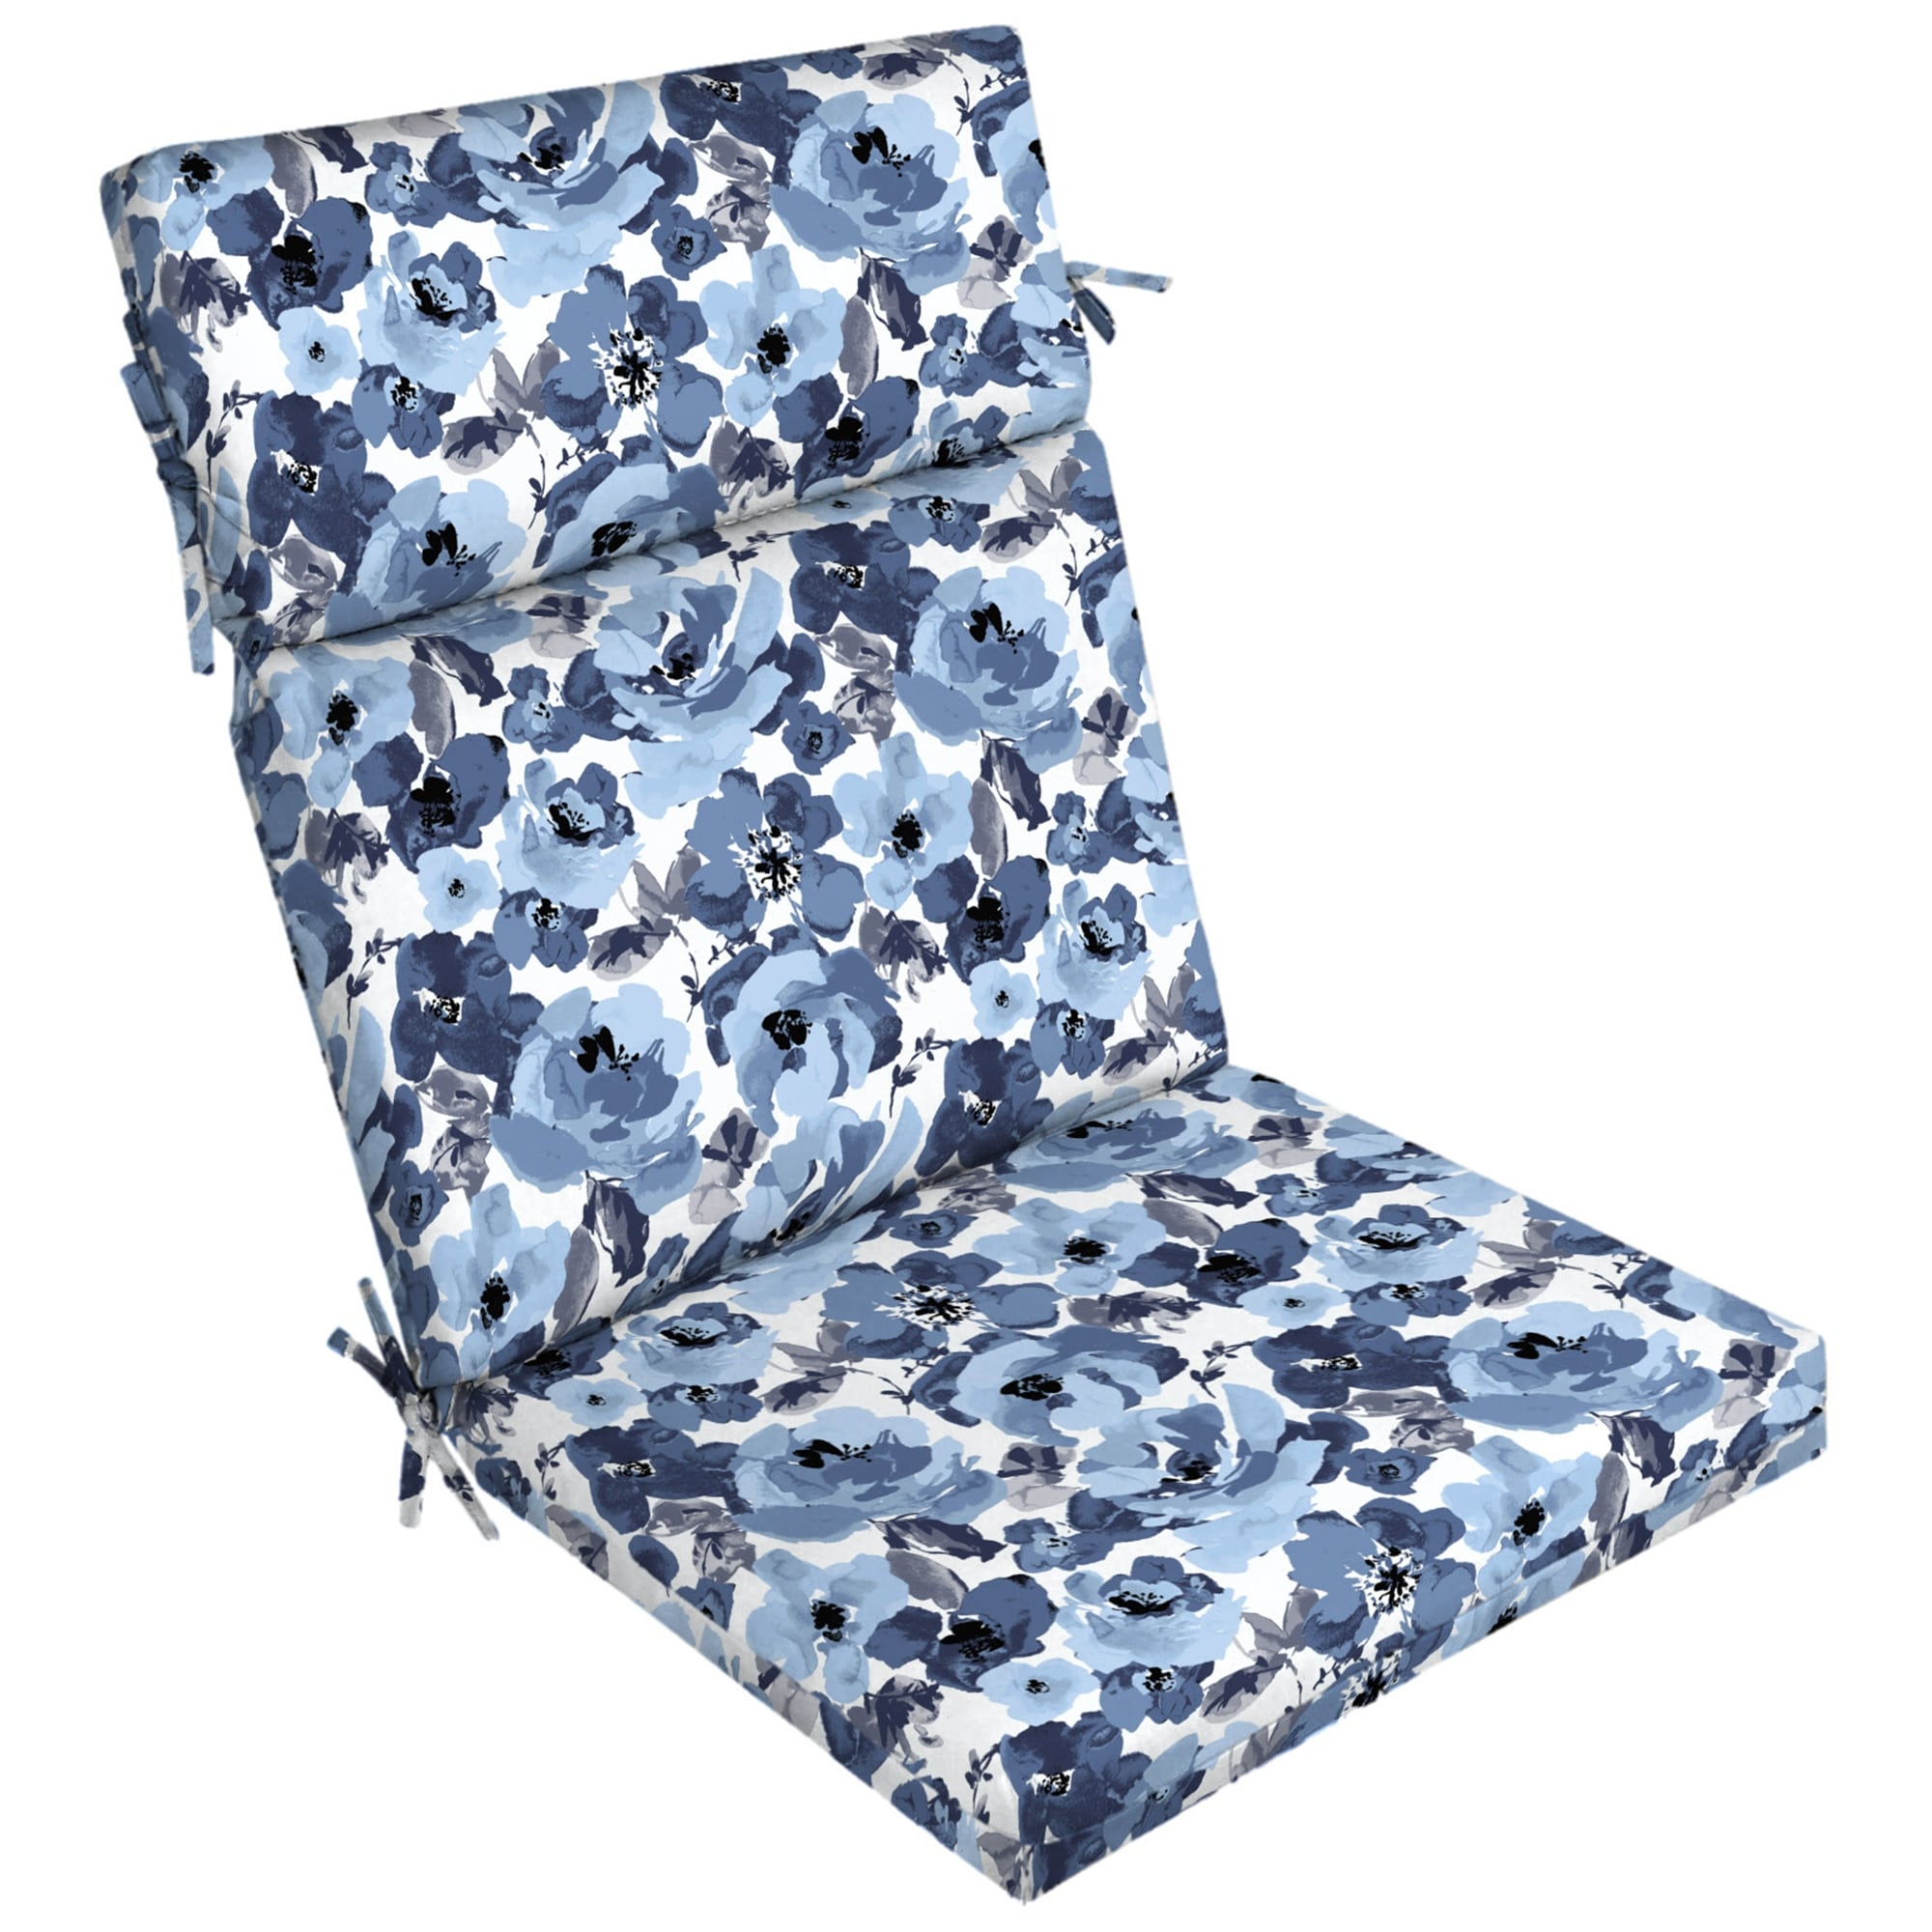 Arden Selections 21 in. x 44 in. Garden Delight Outdoor Dining Chair Cushion